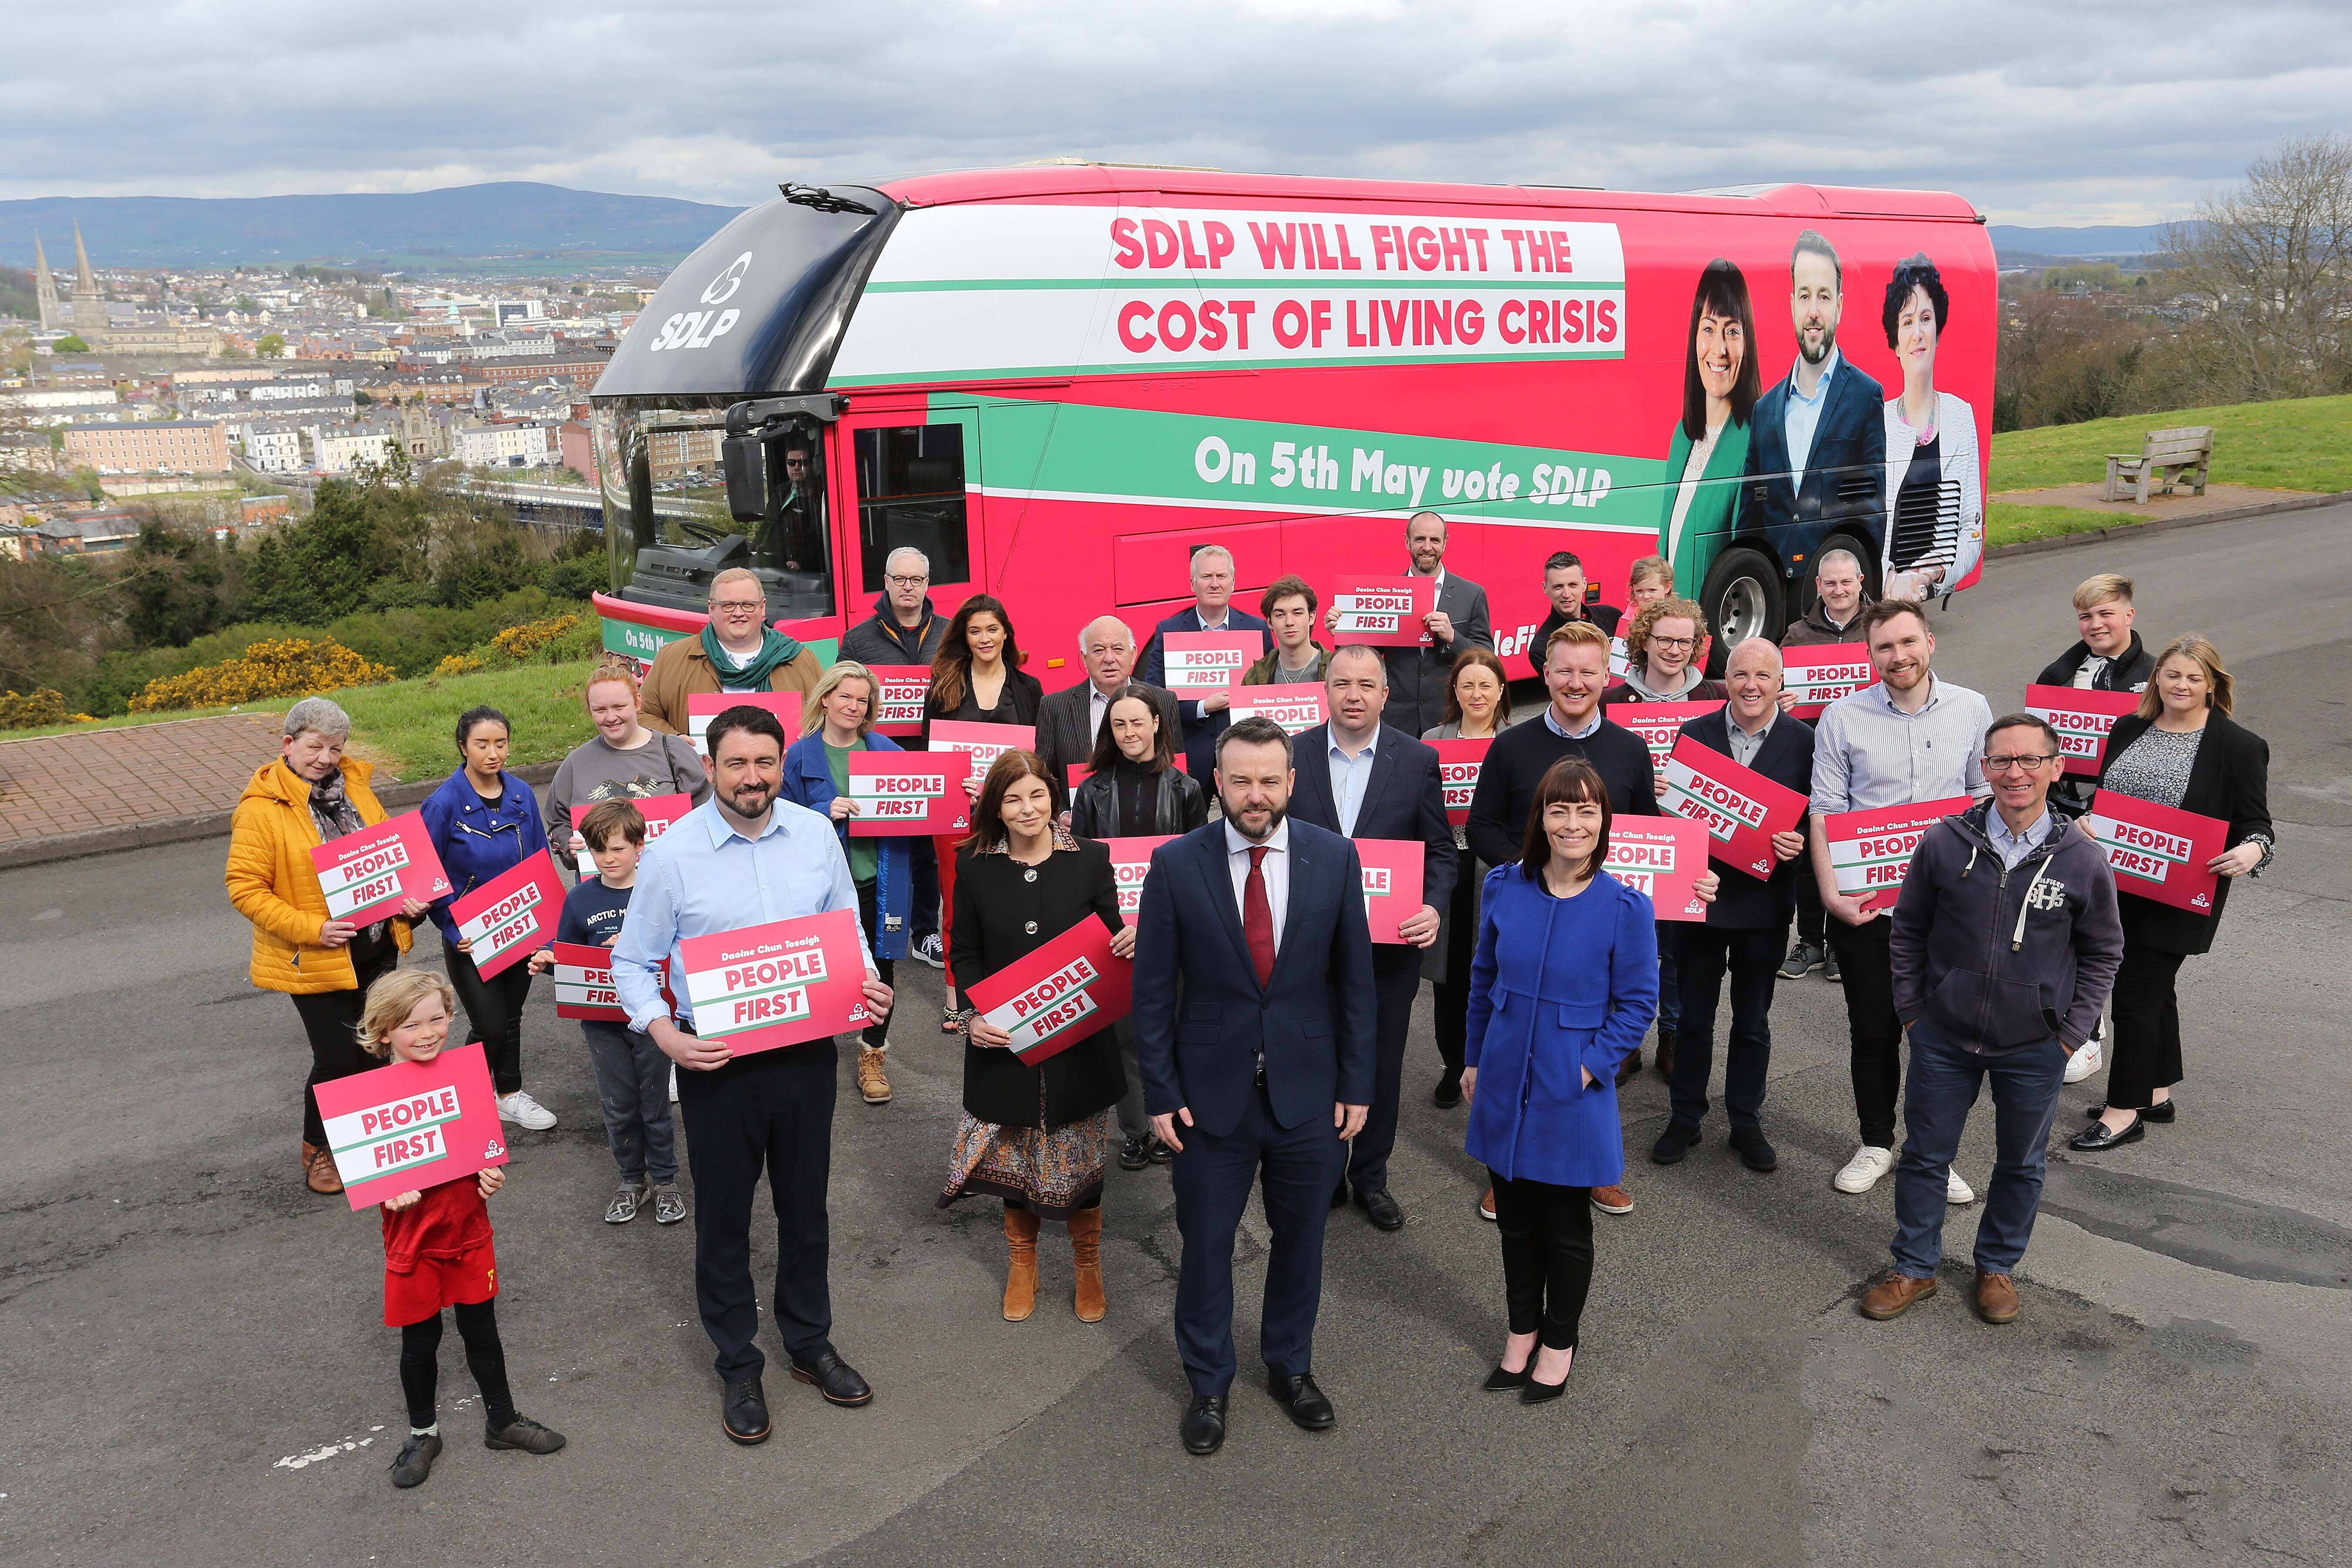 Colum Eastwood and Nichola Mallon (front centre) at the launch of the SDLP People First campaign bus (SDLP/PA)